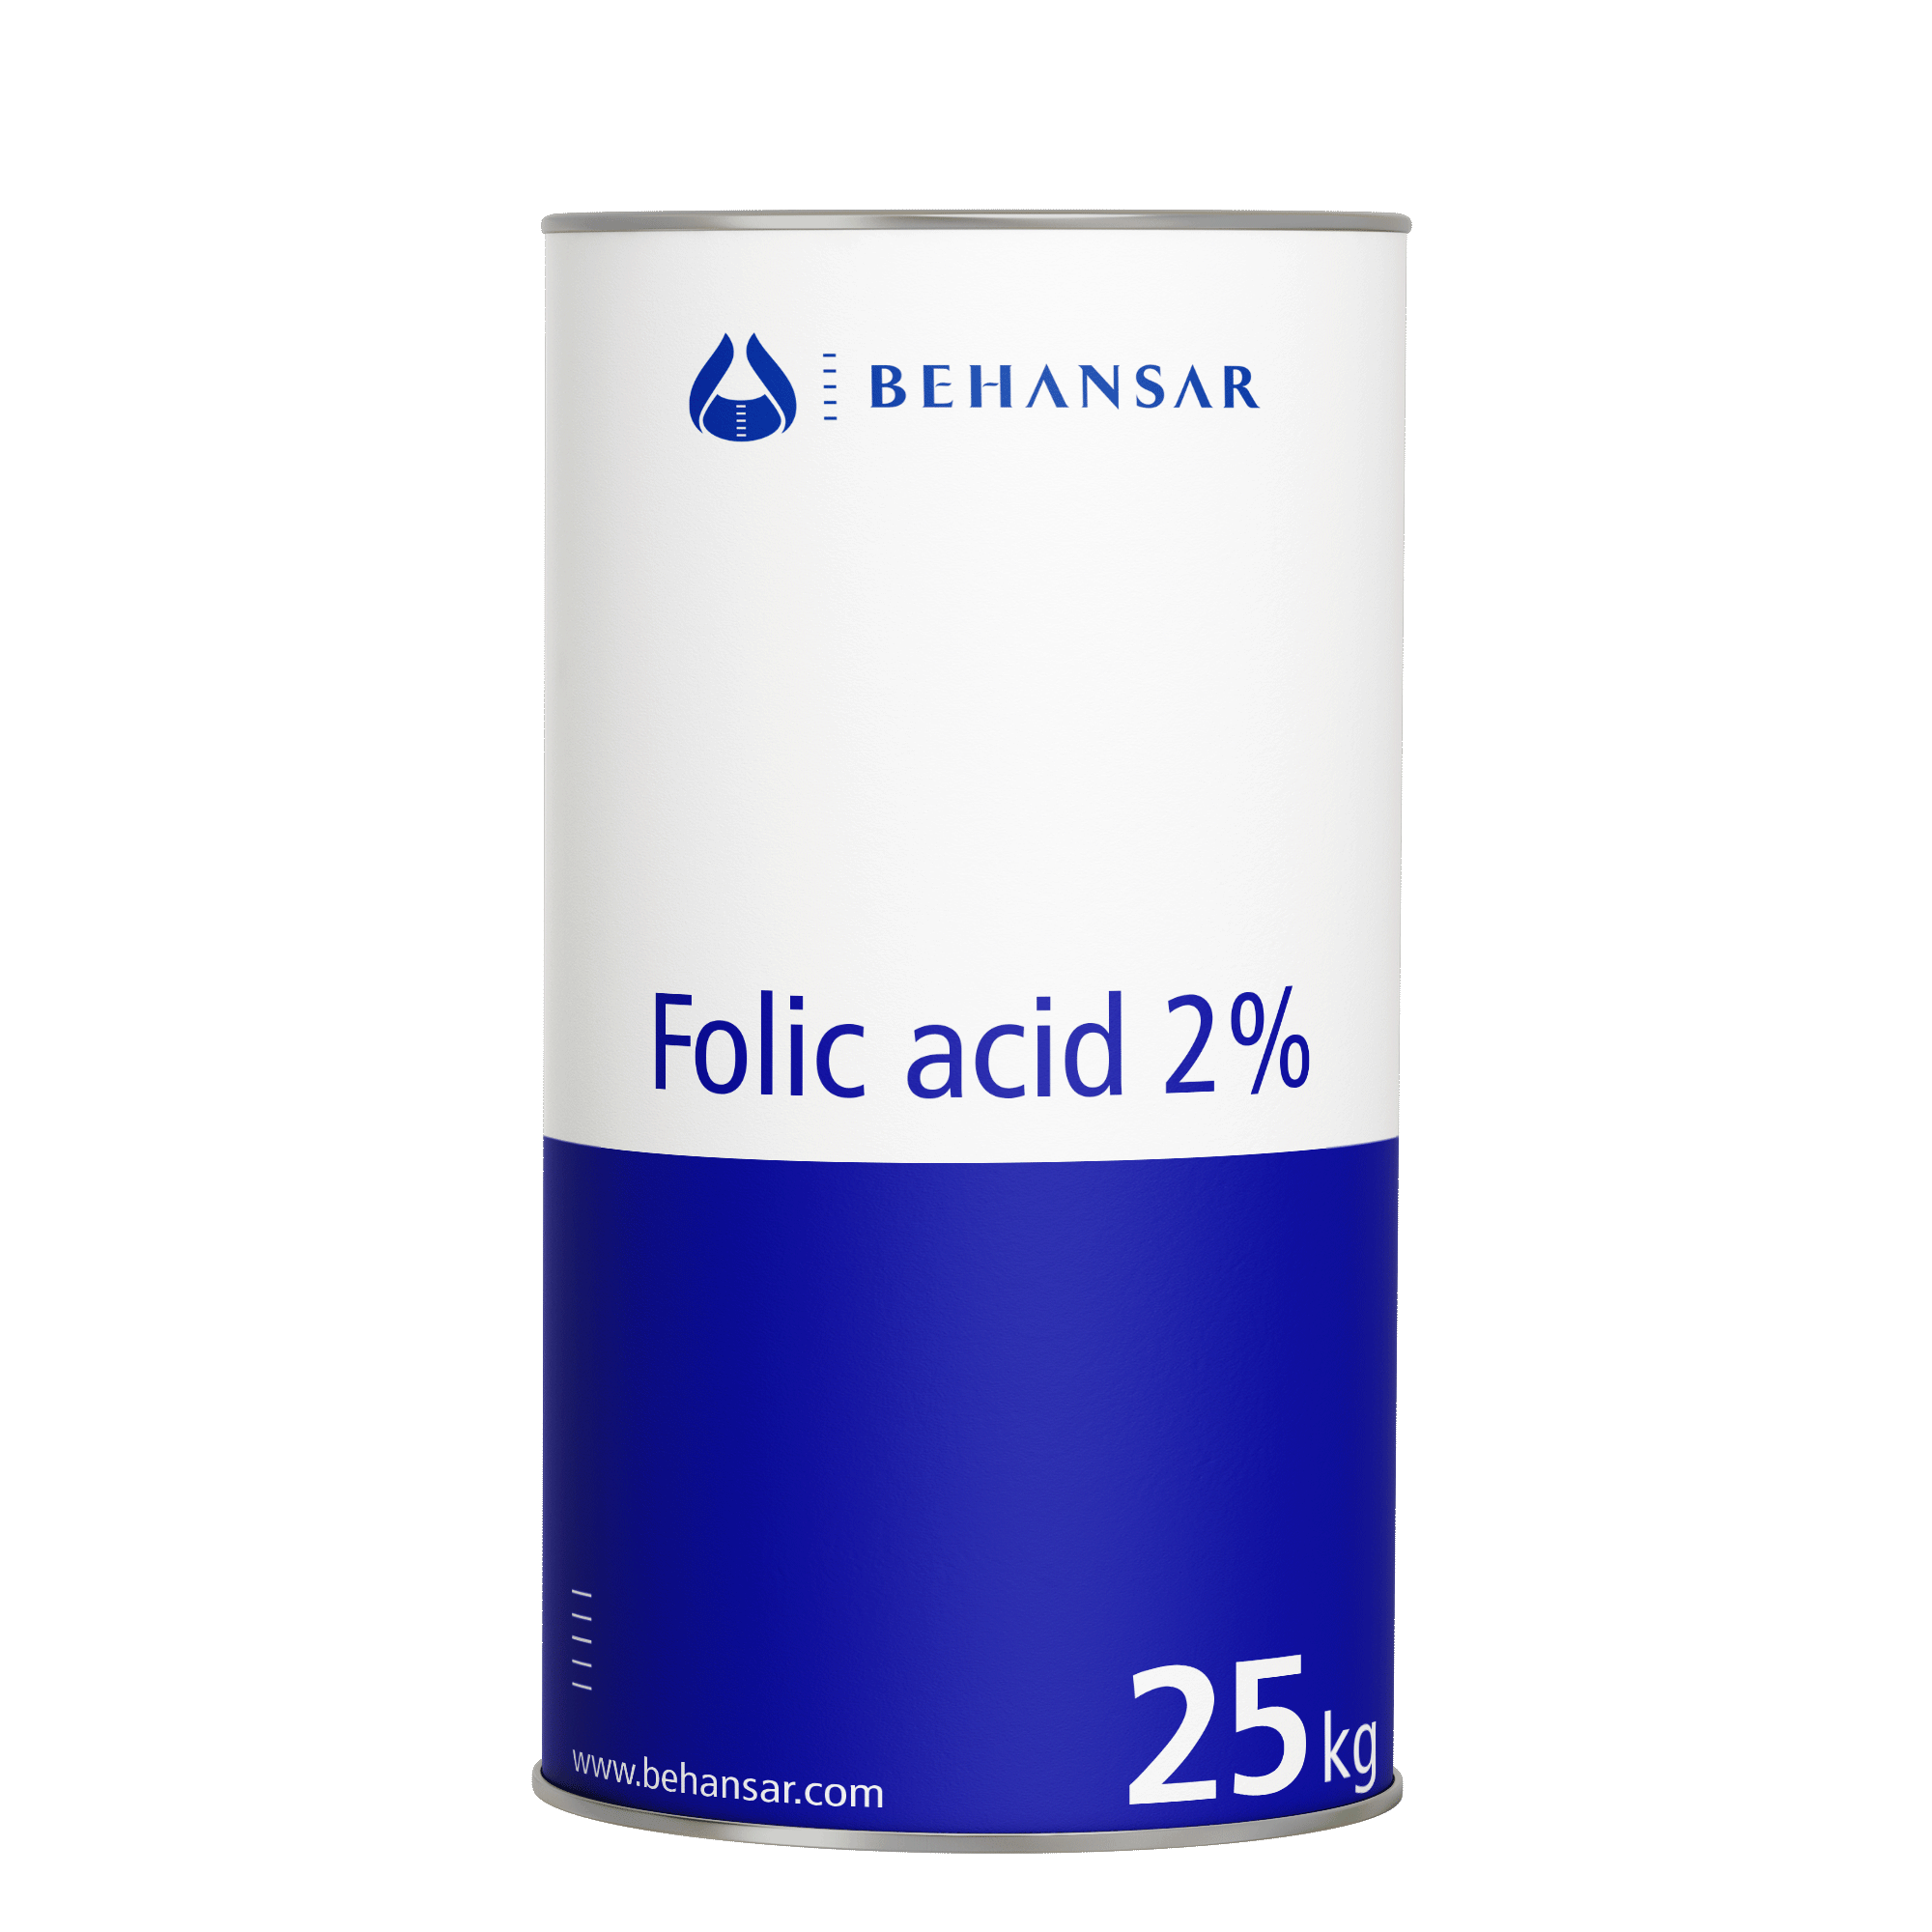 Folic acid 2% is one of the products of Behansar Co